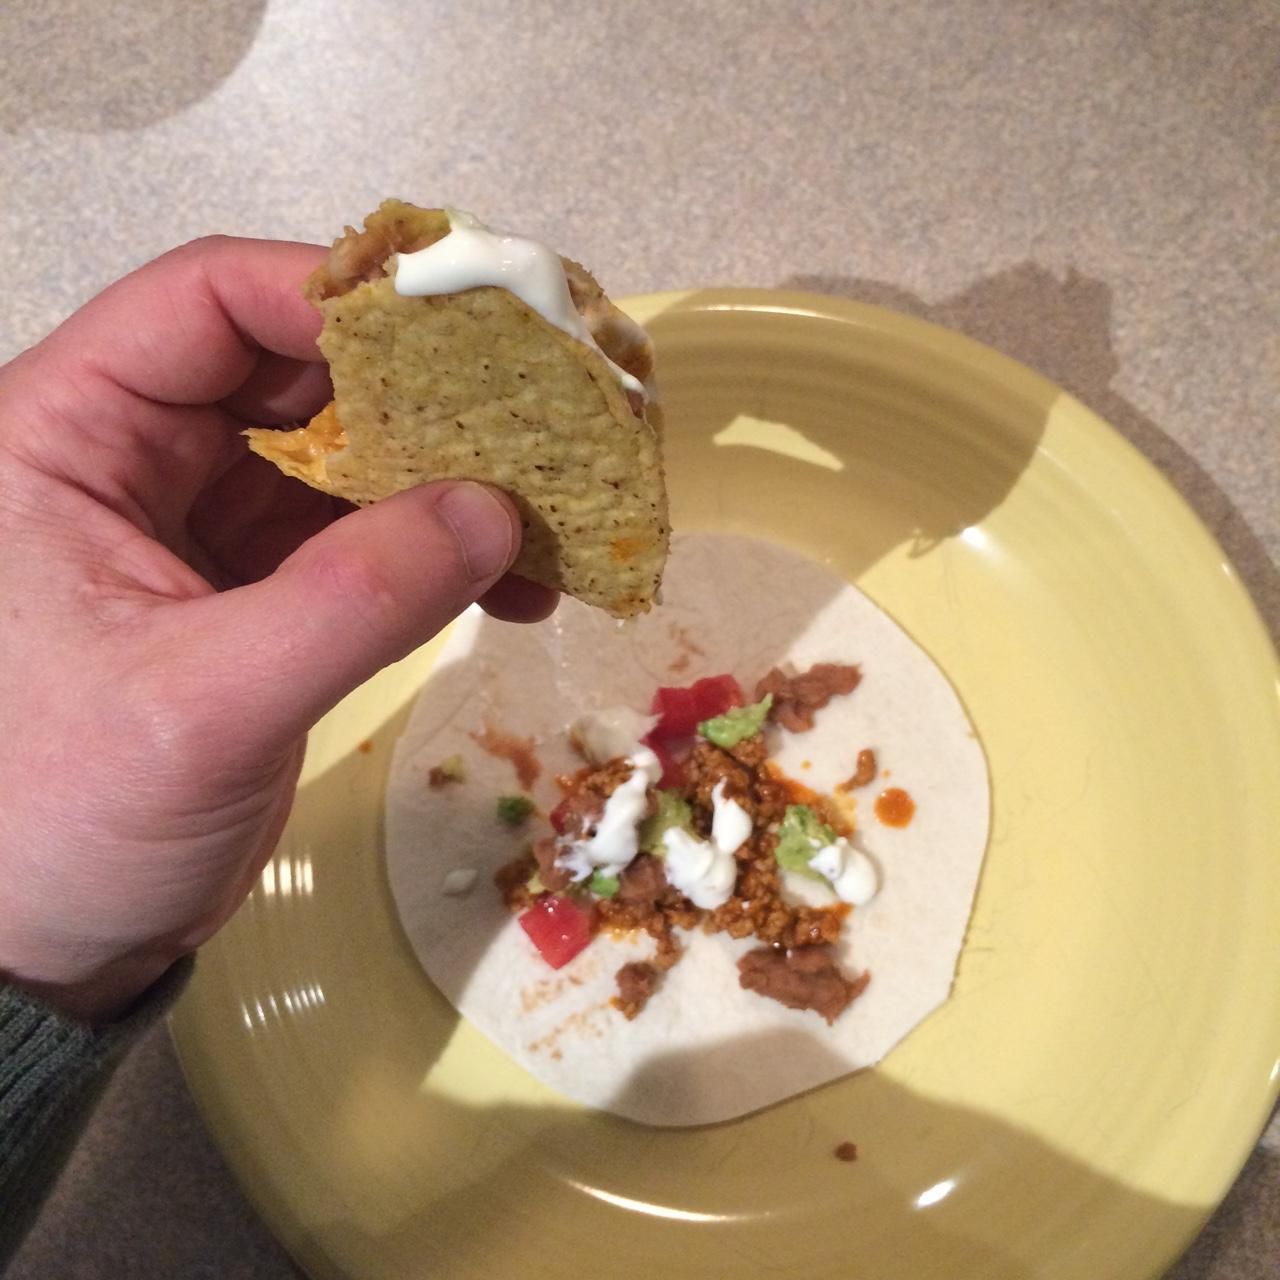 LPT- eating a hard taco over a soft tortilla shell nets you a second taco absolutely free. You're welcome world.